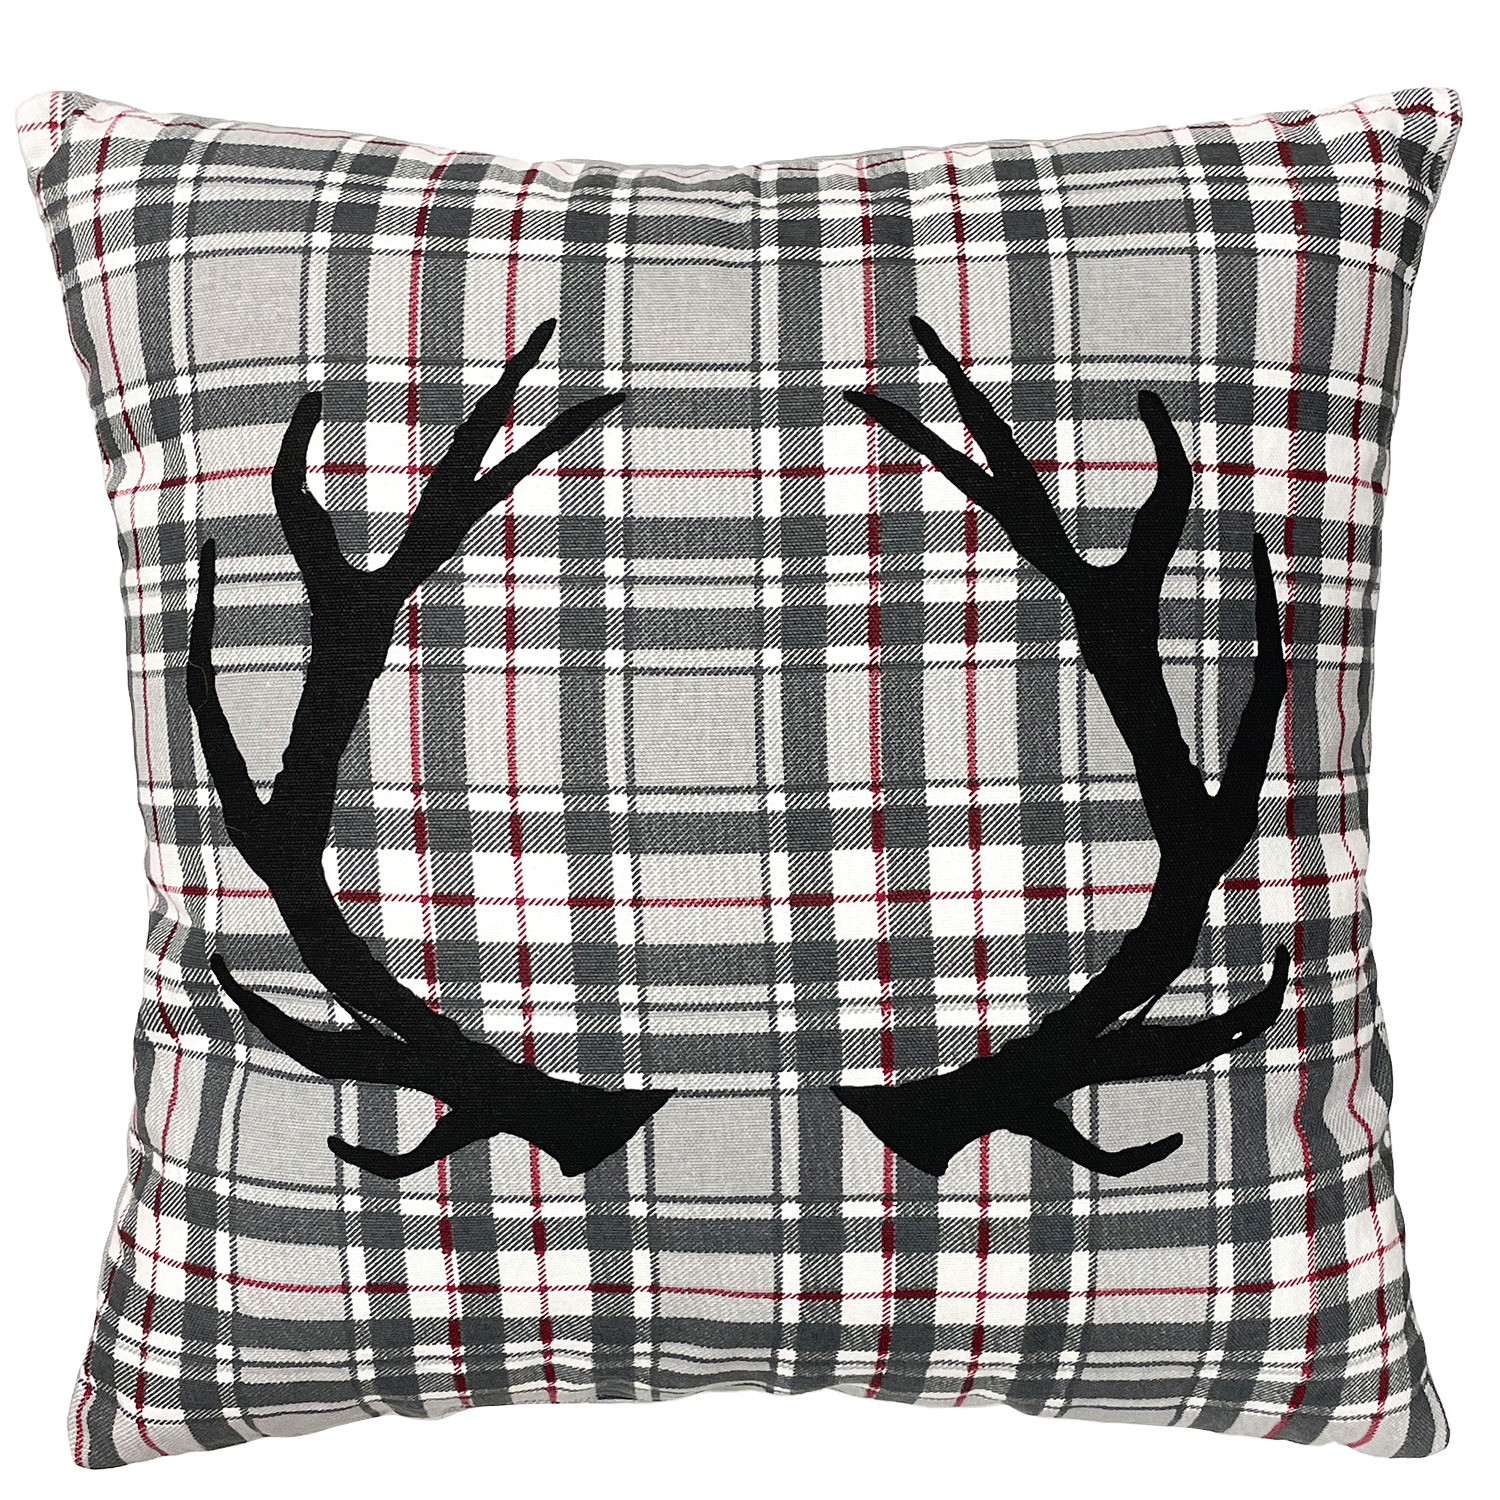 Printed decorative cushion, 16"x16" - Antlers and plaid